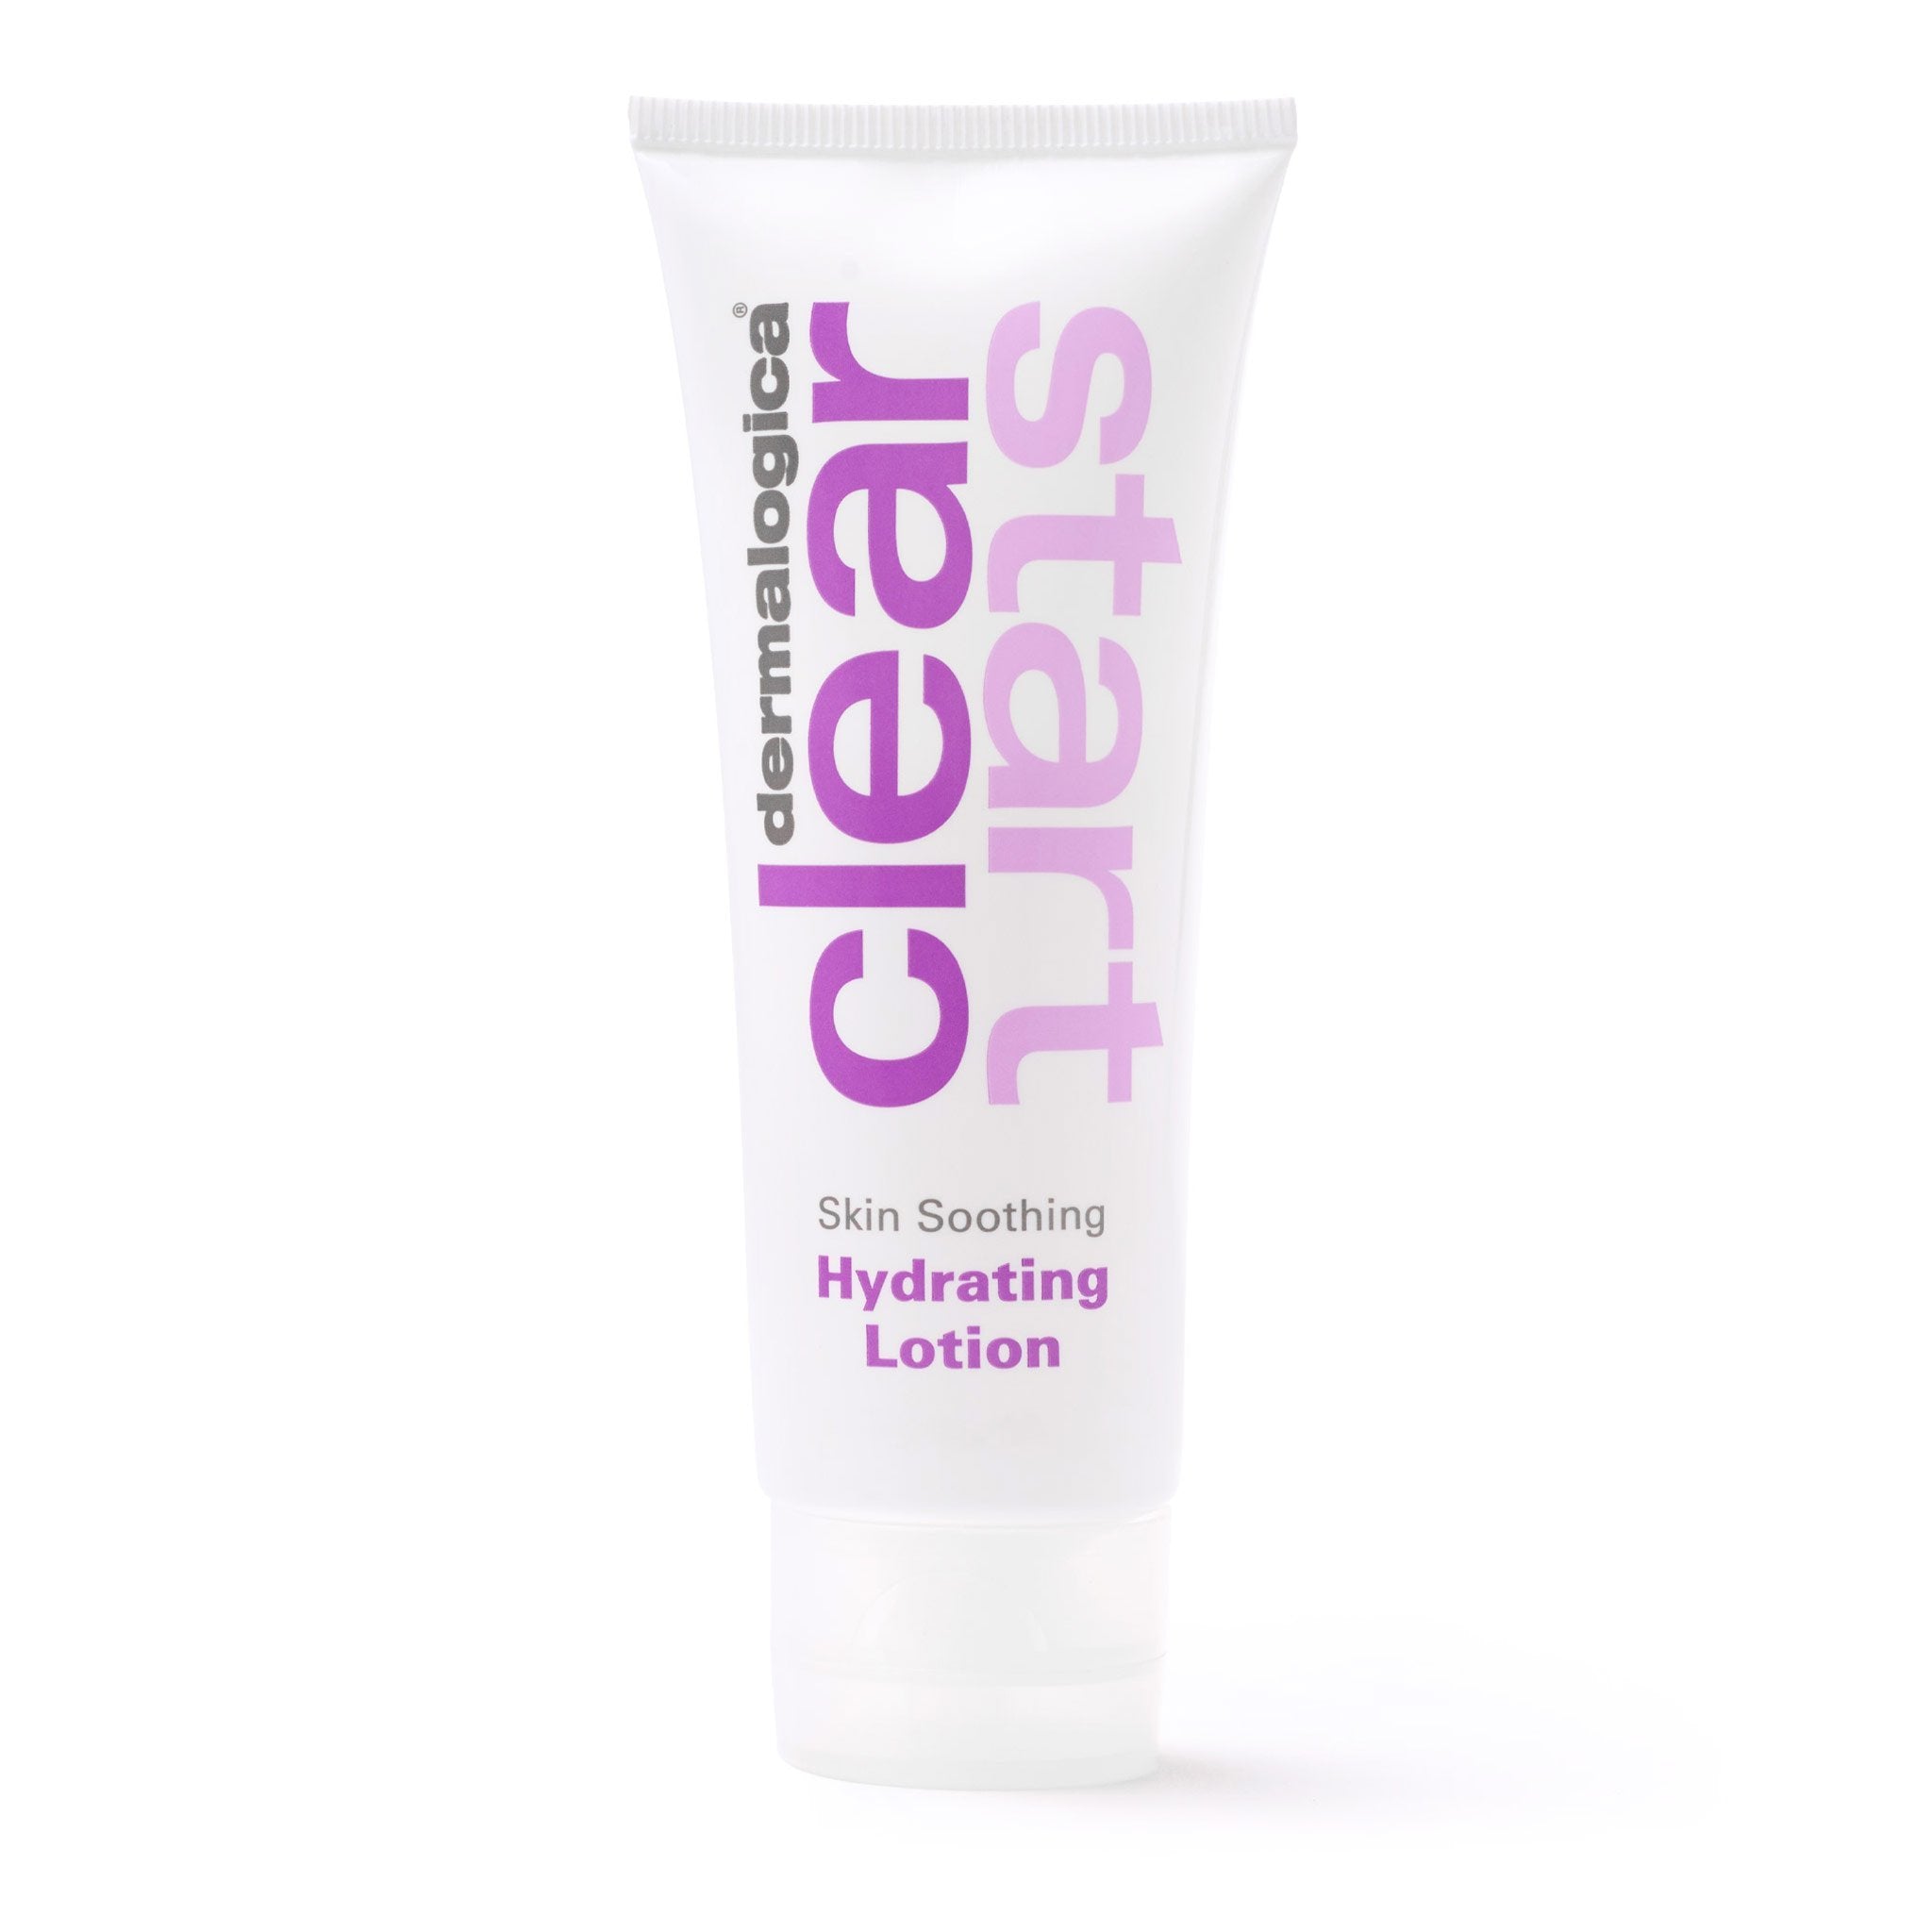 Dermalogica skin soothing hydrating lotion 59ml - Clear Start